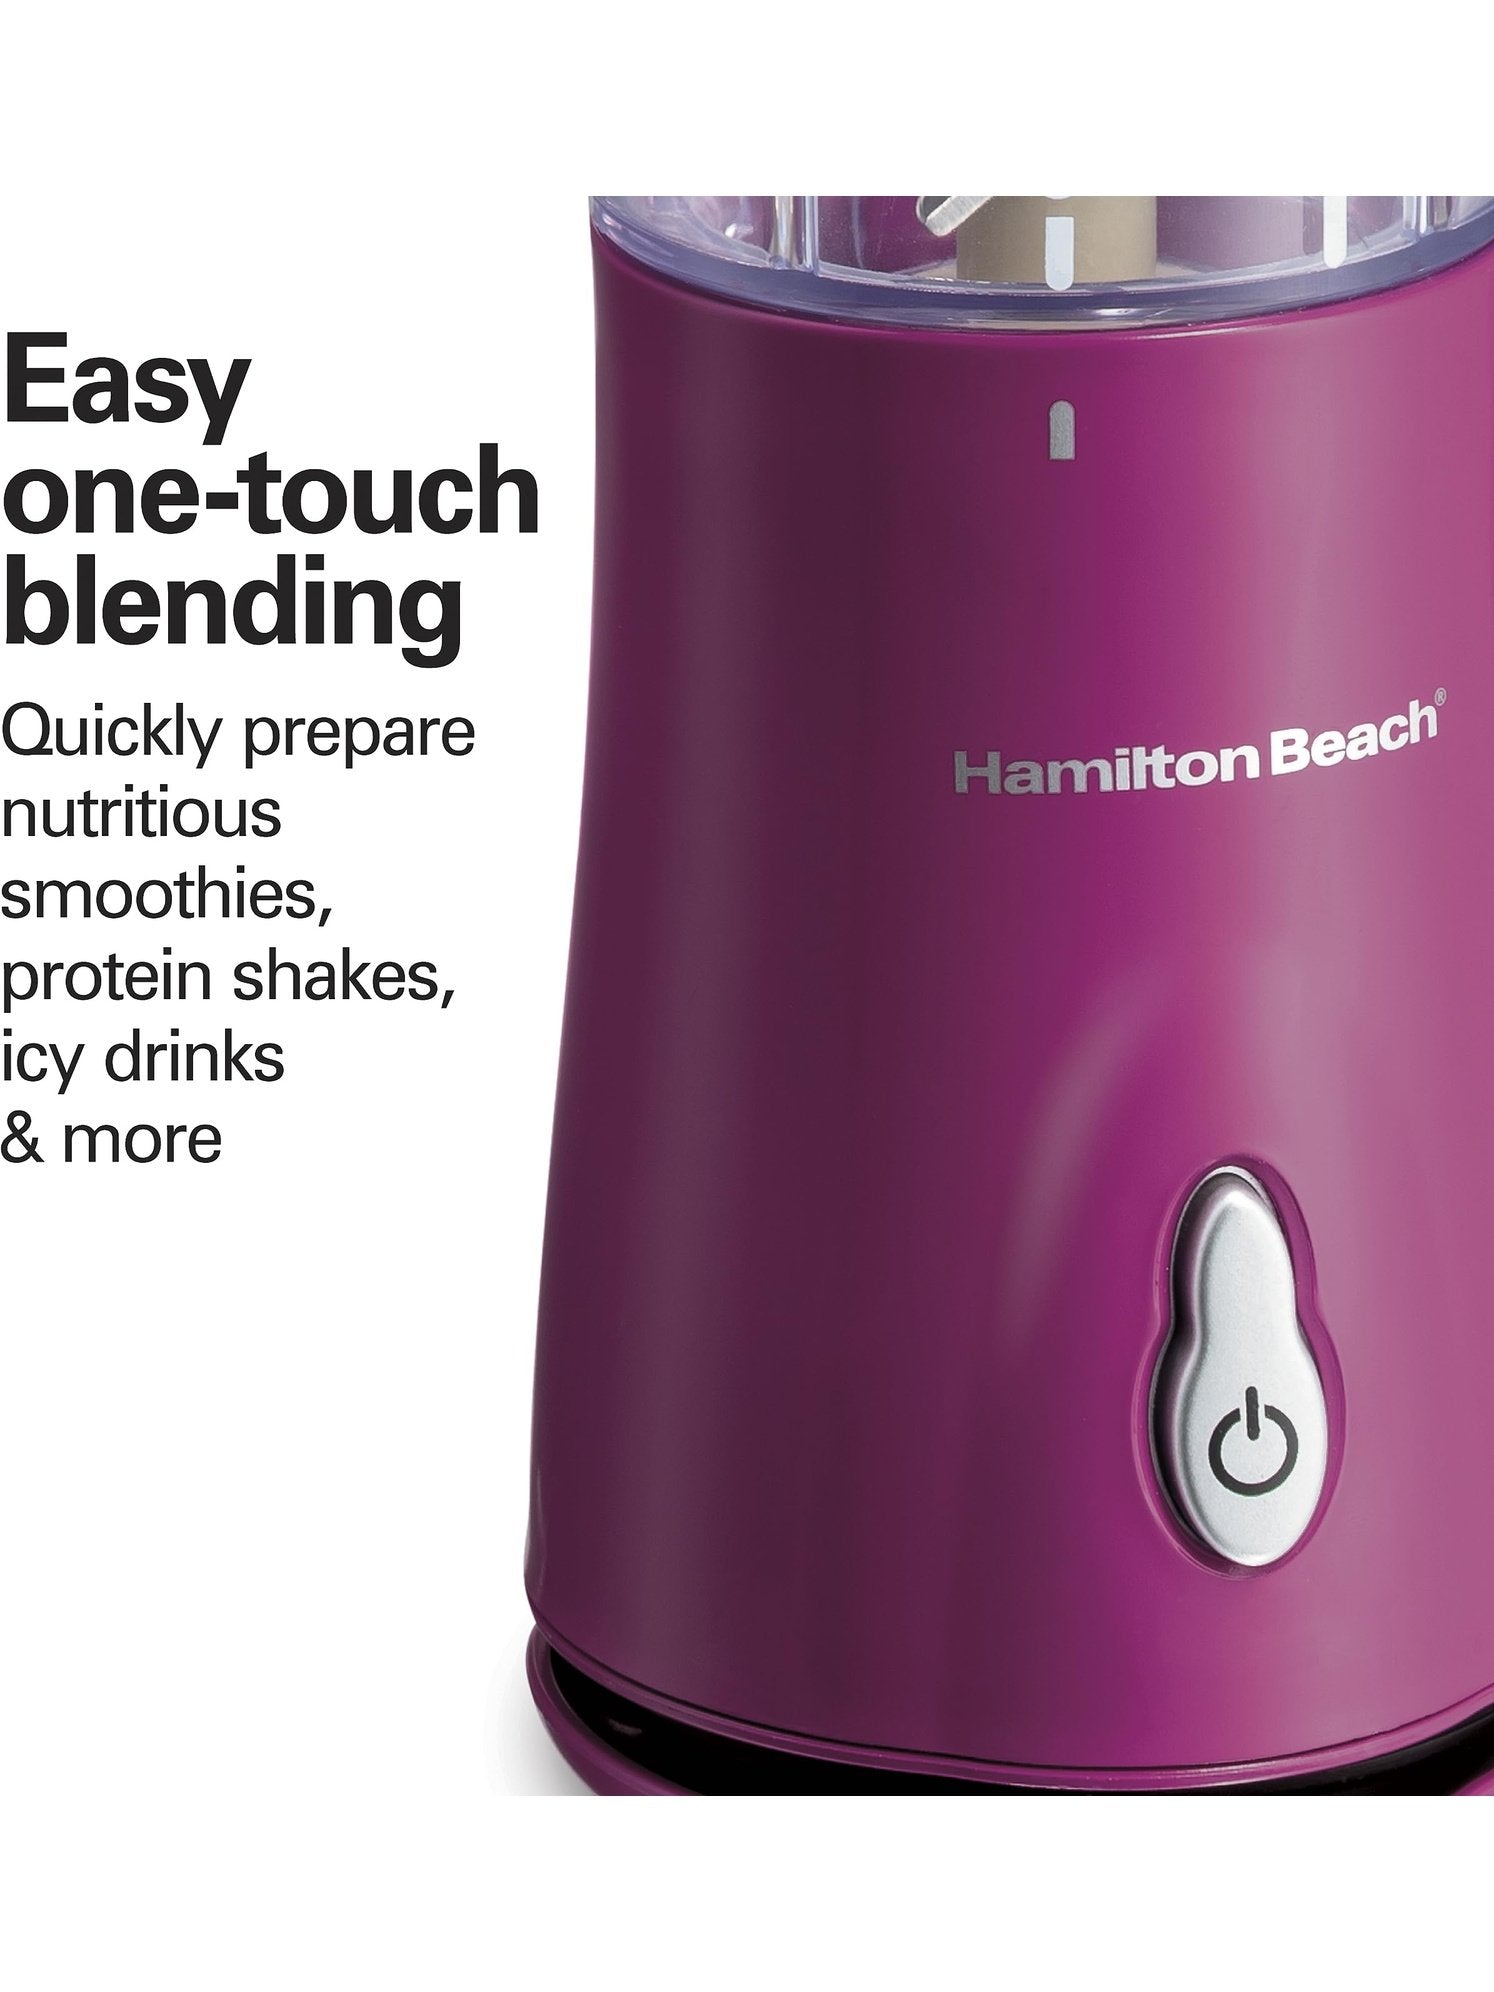 Hamilton Beach Portable Blender for Shakes and Smoothies with 14 Oz BPA Free Travel Cup and Lid, Durable Stainless Steel Blades for Powerful Blending Performance, Blue (51132)